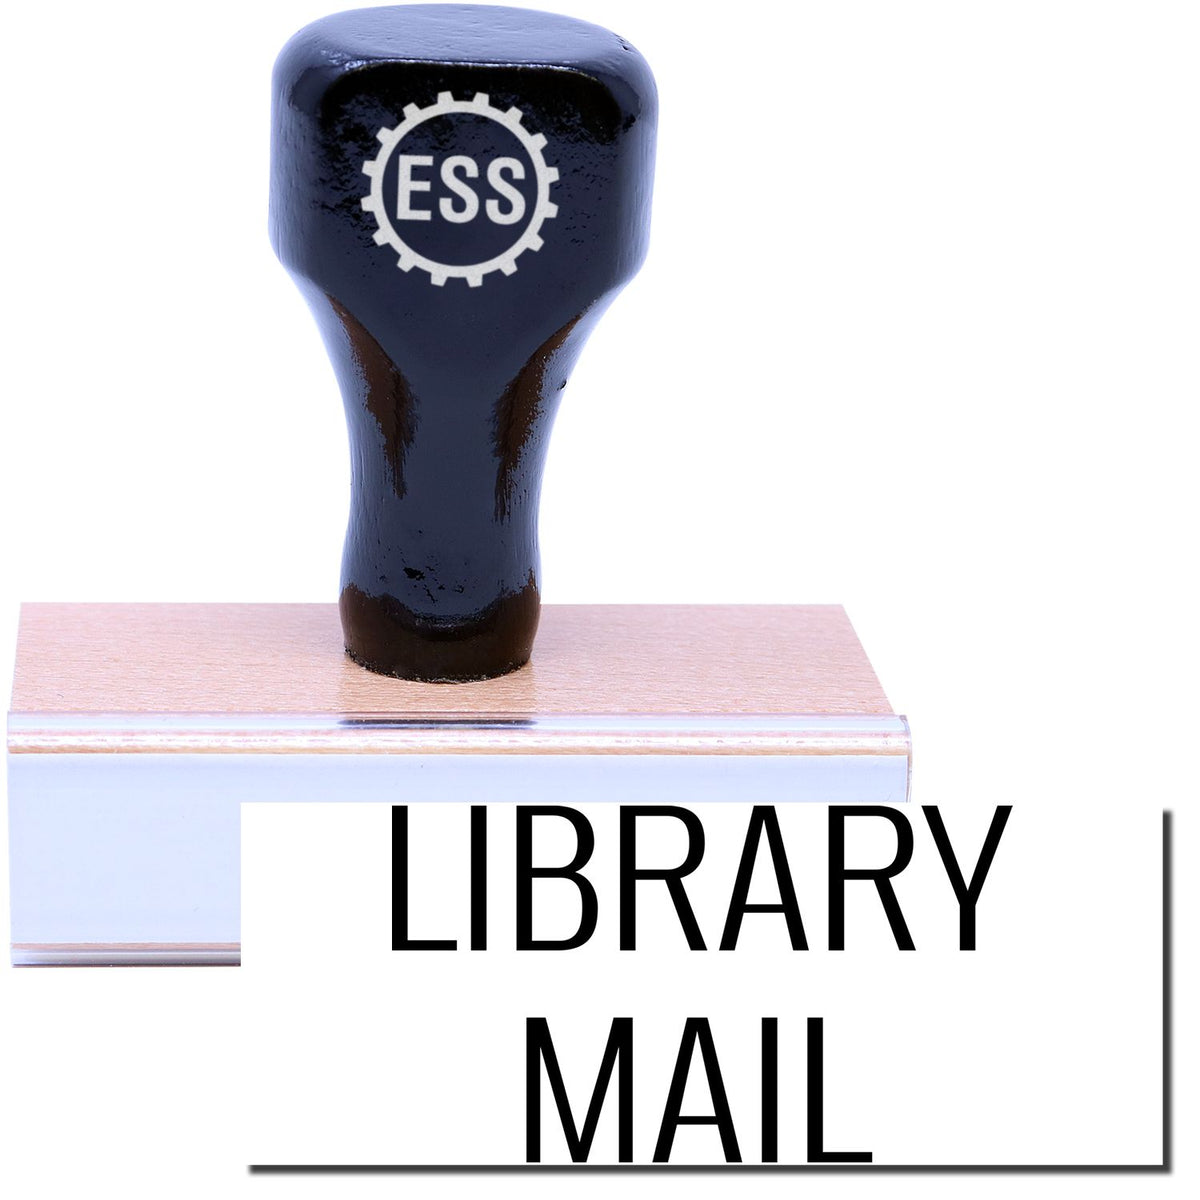 A stock office rubber stamp with a stamped image showing how the text &quot;LIBRARY MAIL&quot; in a large font is displayed after stamping.